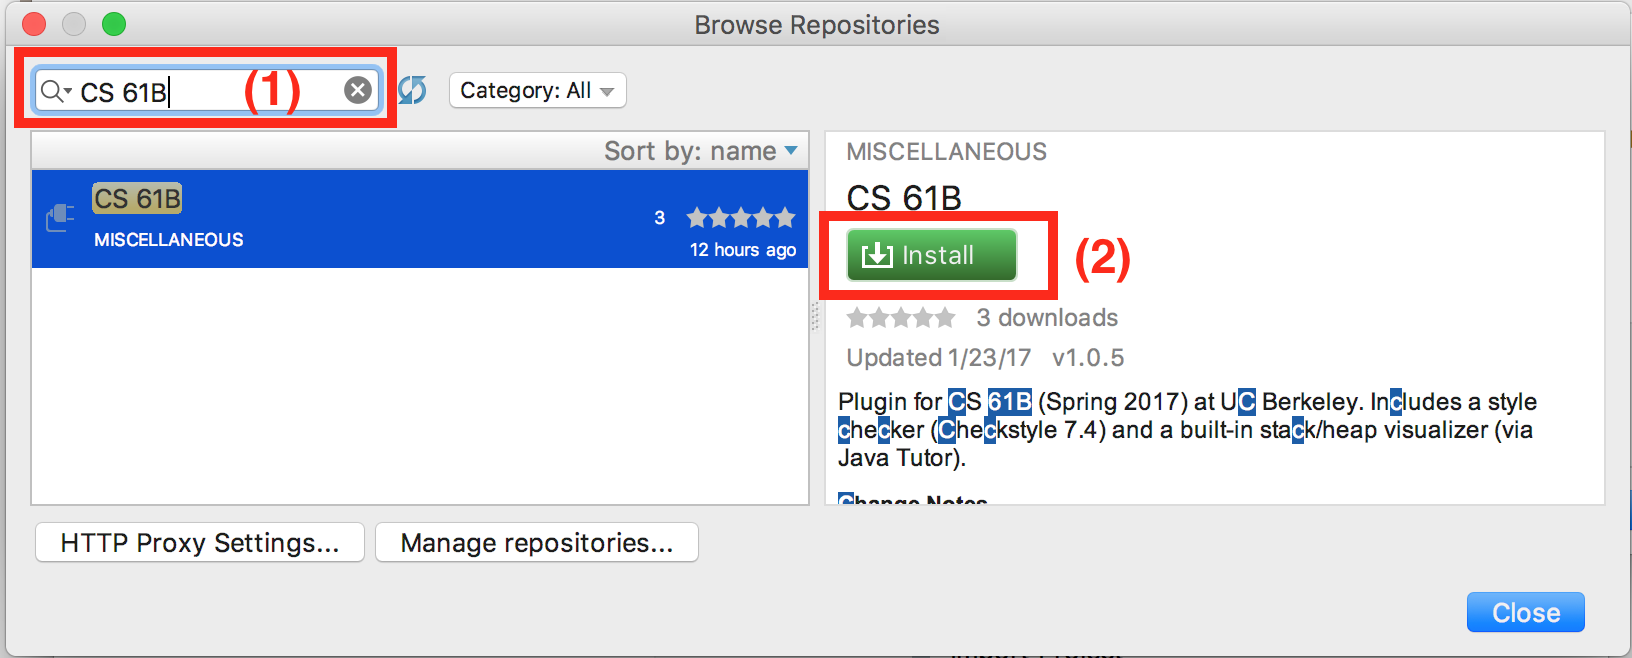 Browse Repositories